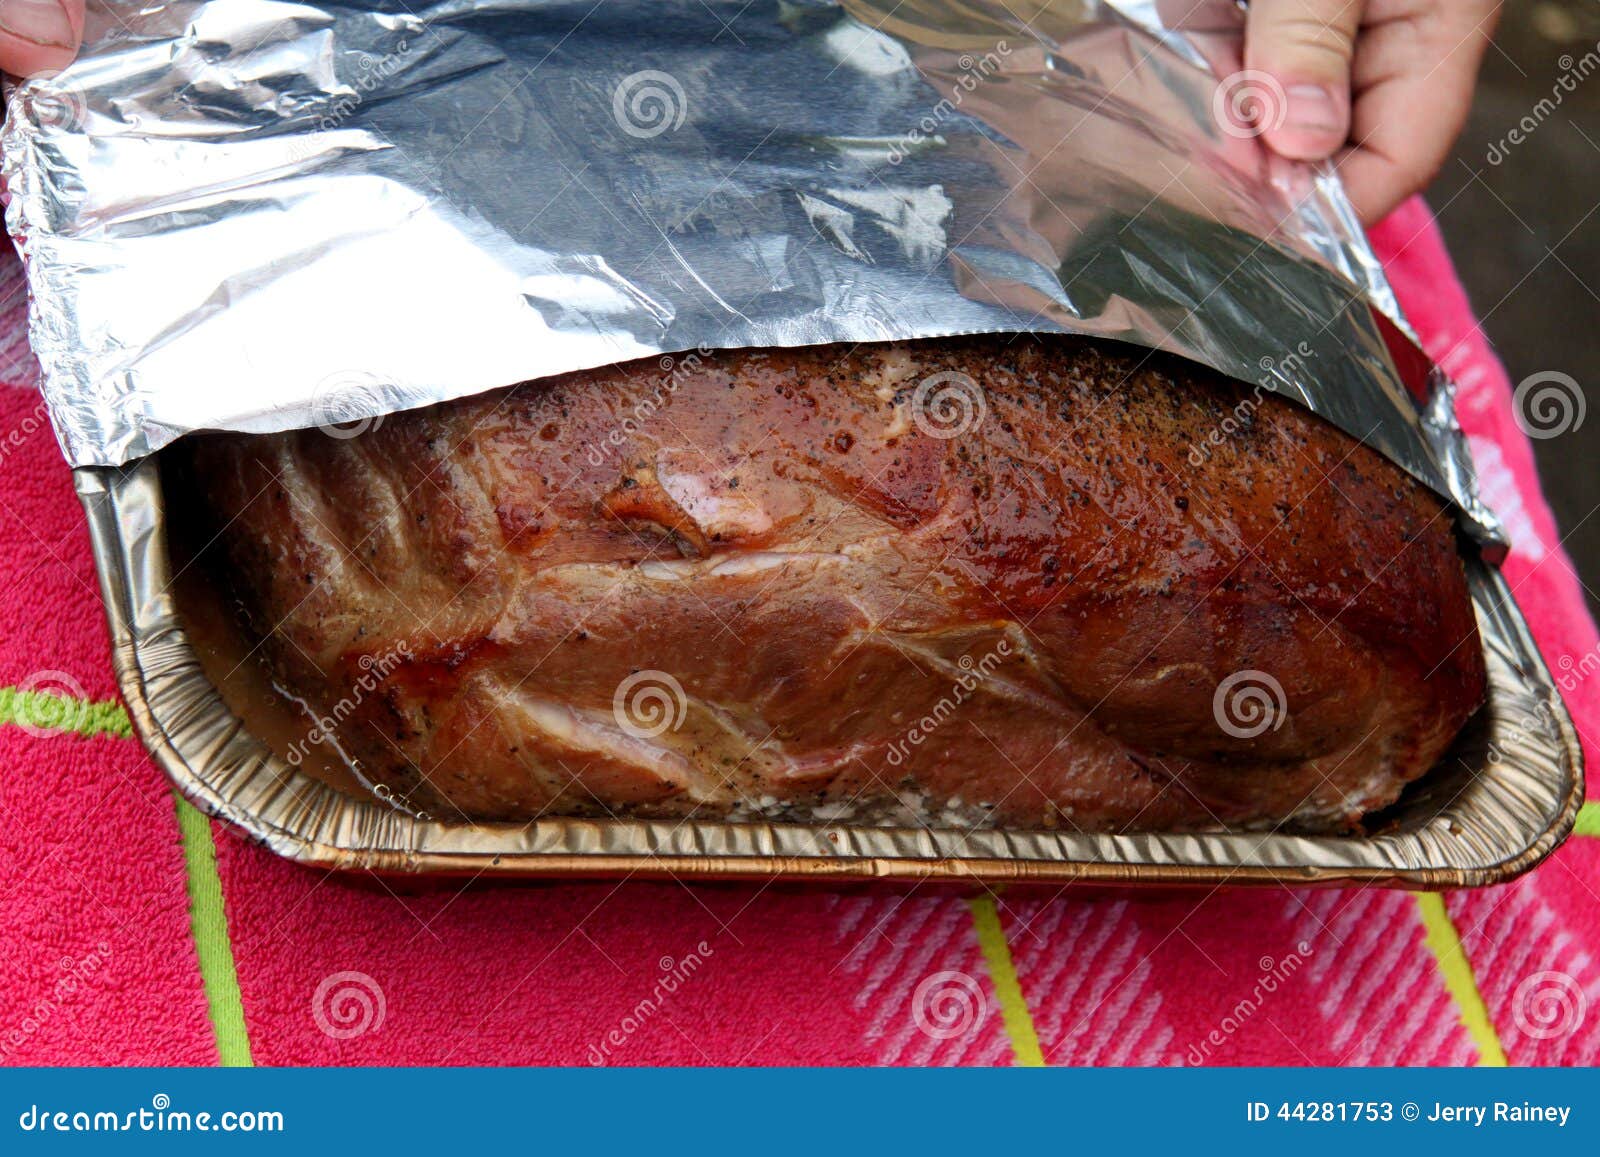 Smoked Roasted Pork Roast For Pulled Pork Being Wrapped In Foil Stock Image Image Of Pork Pulled 44281753